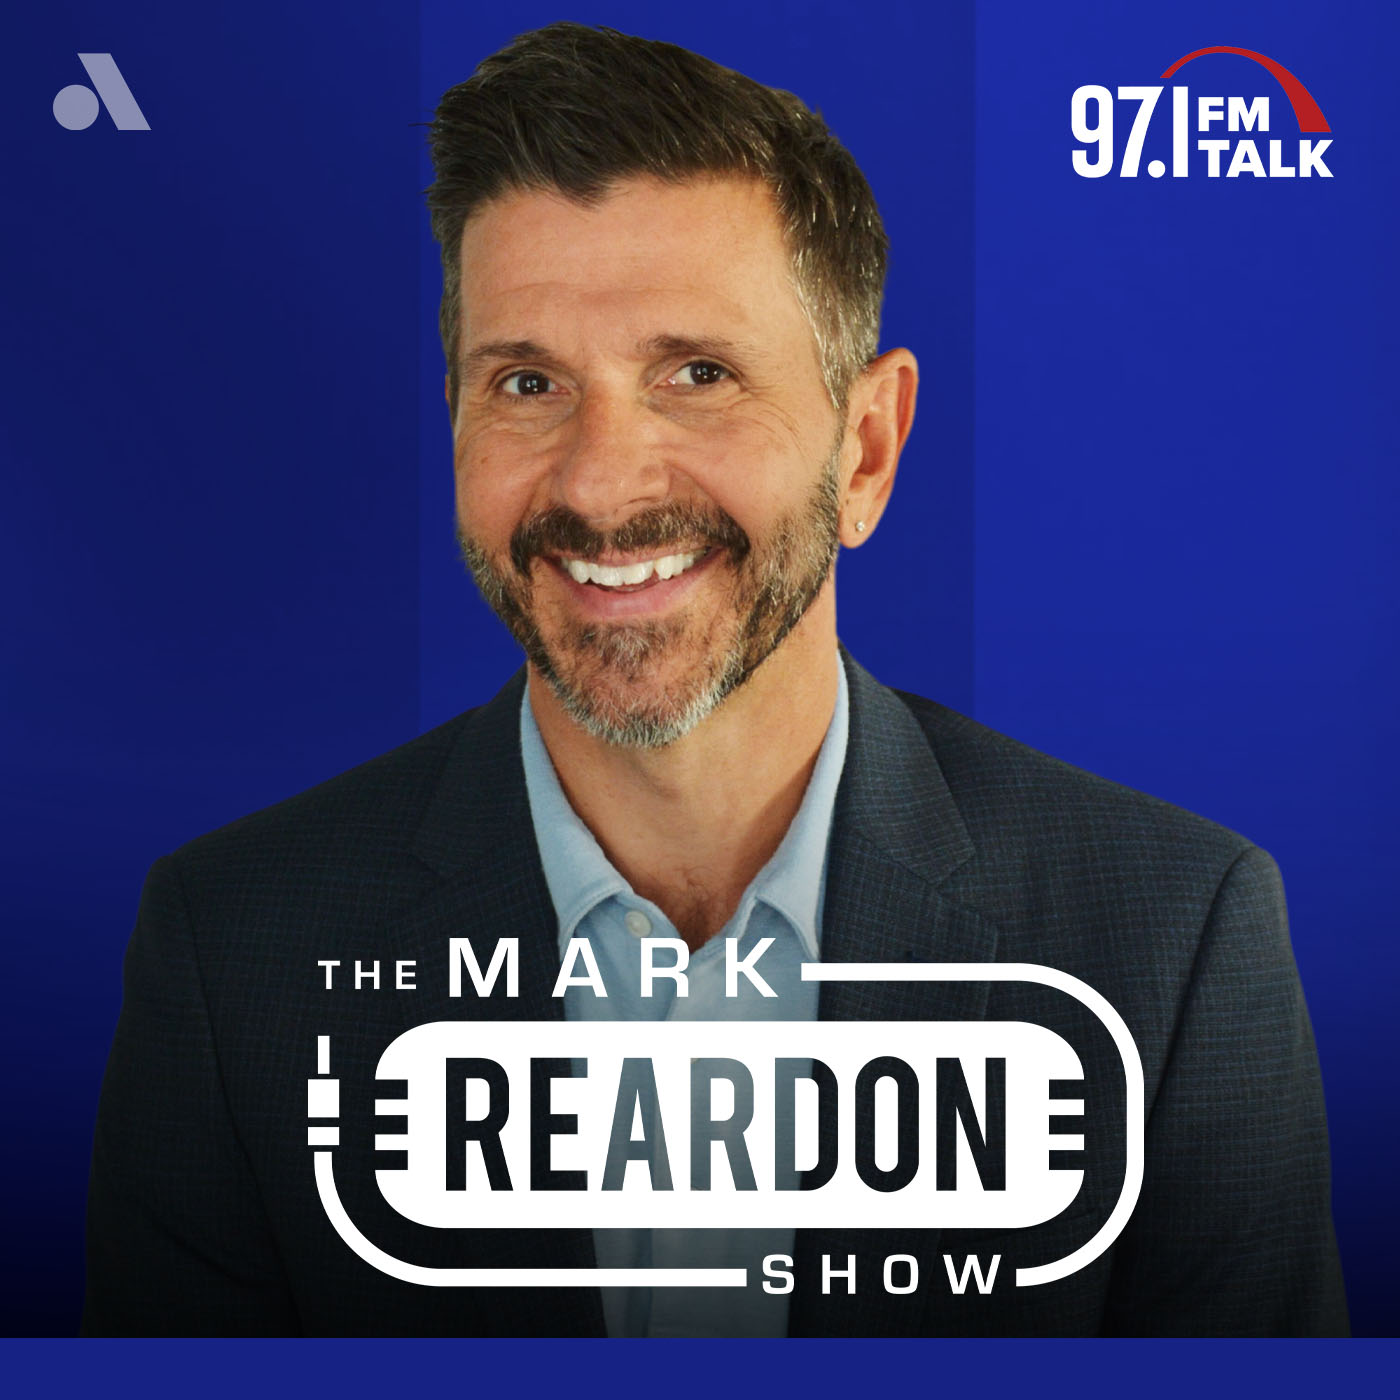 May 8th 2020 HOUR 1 - The Reardon Roundtable